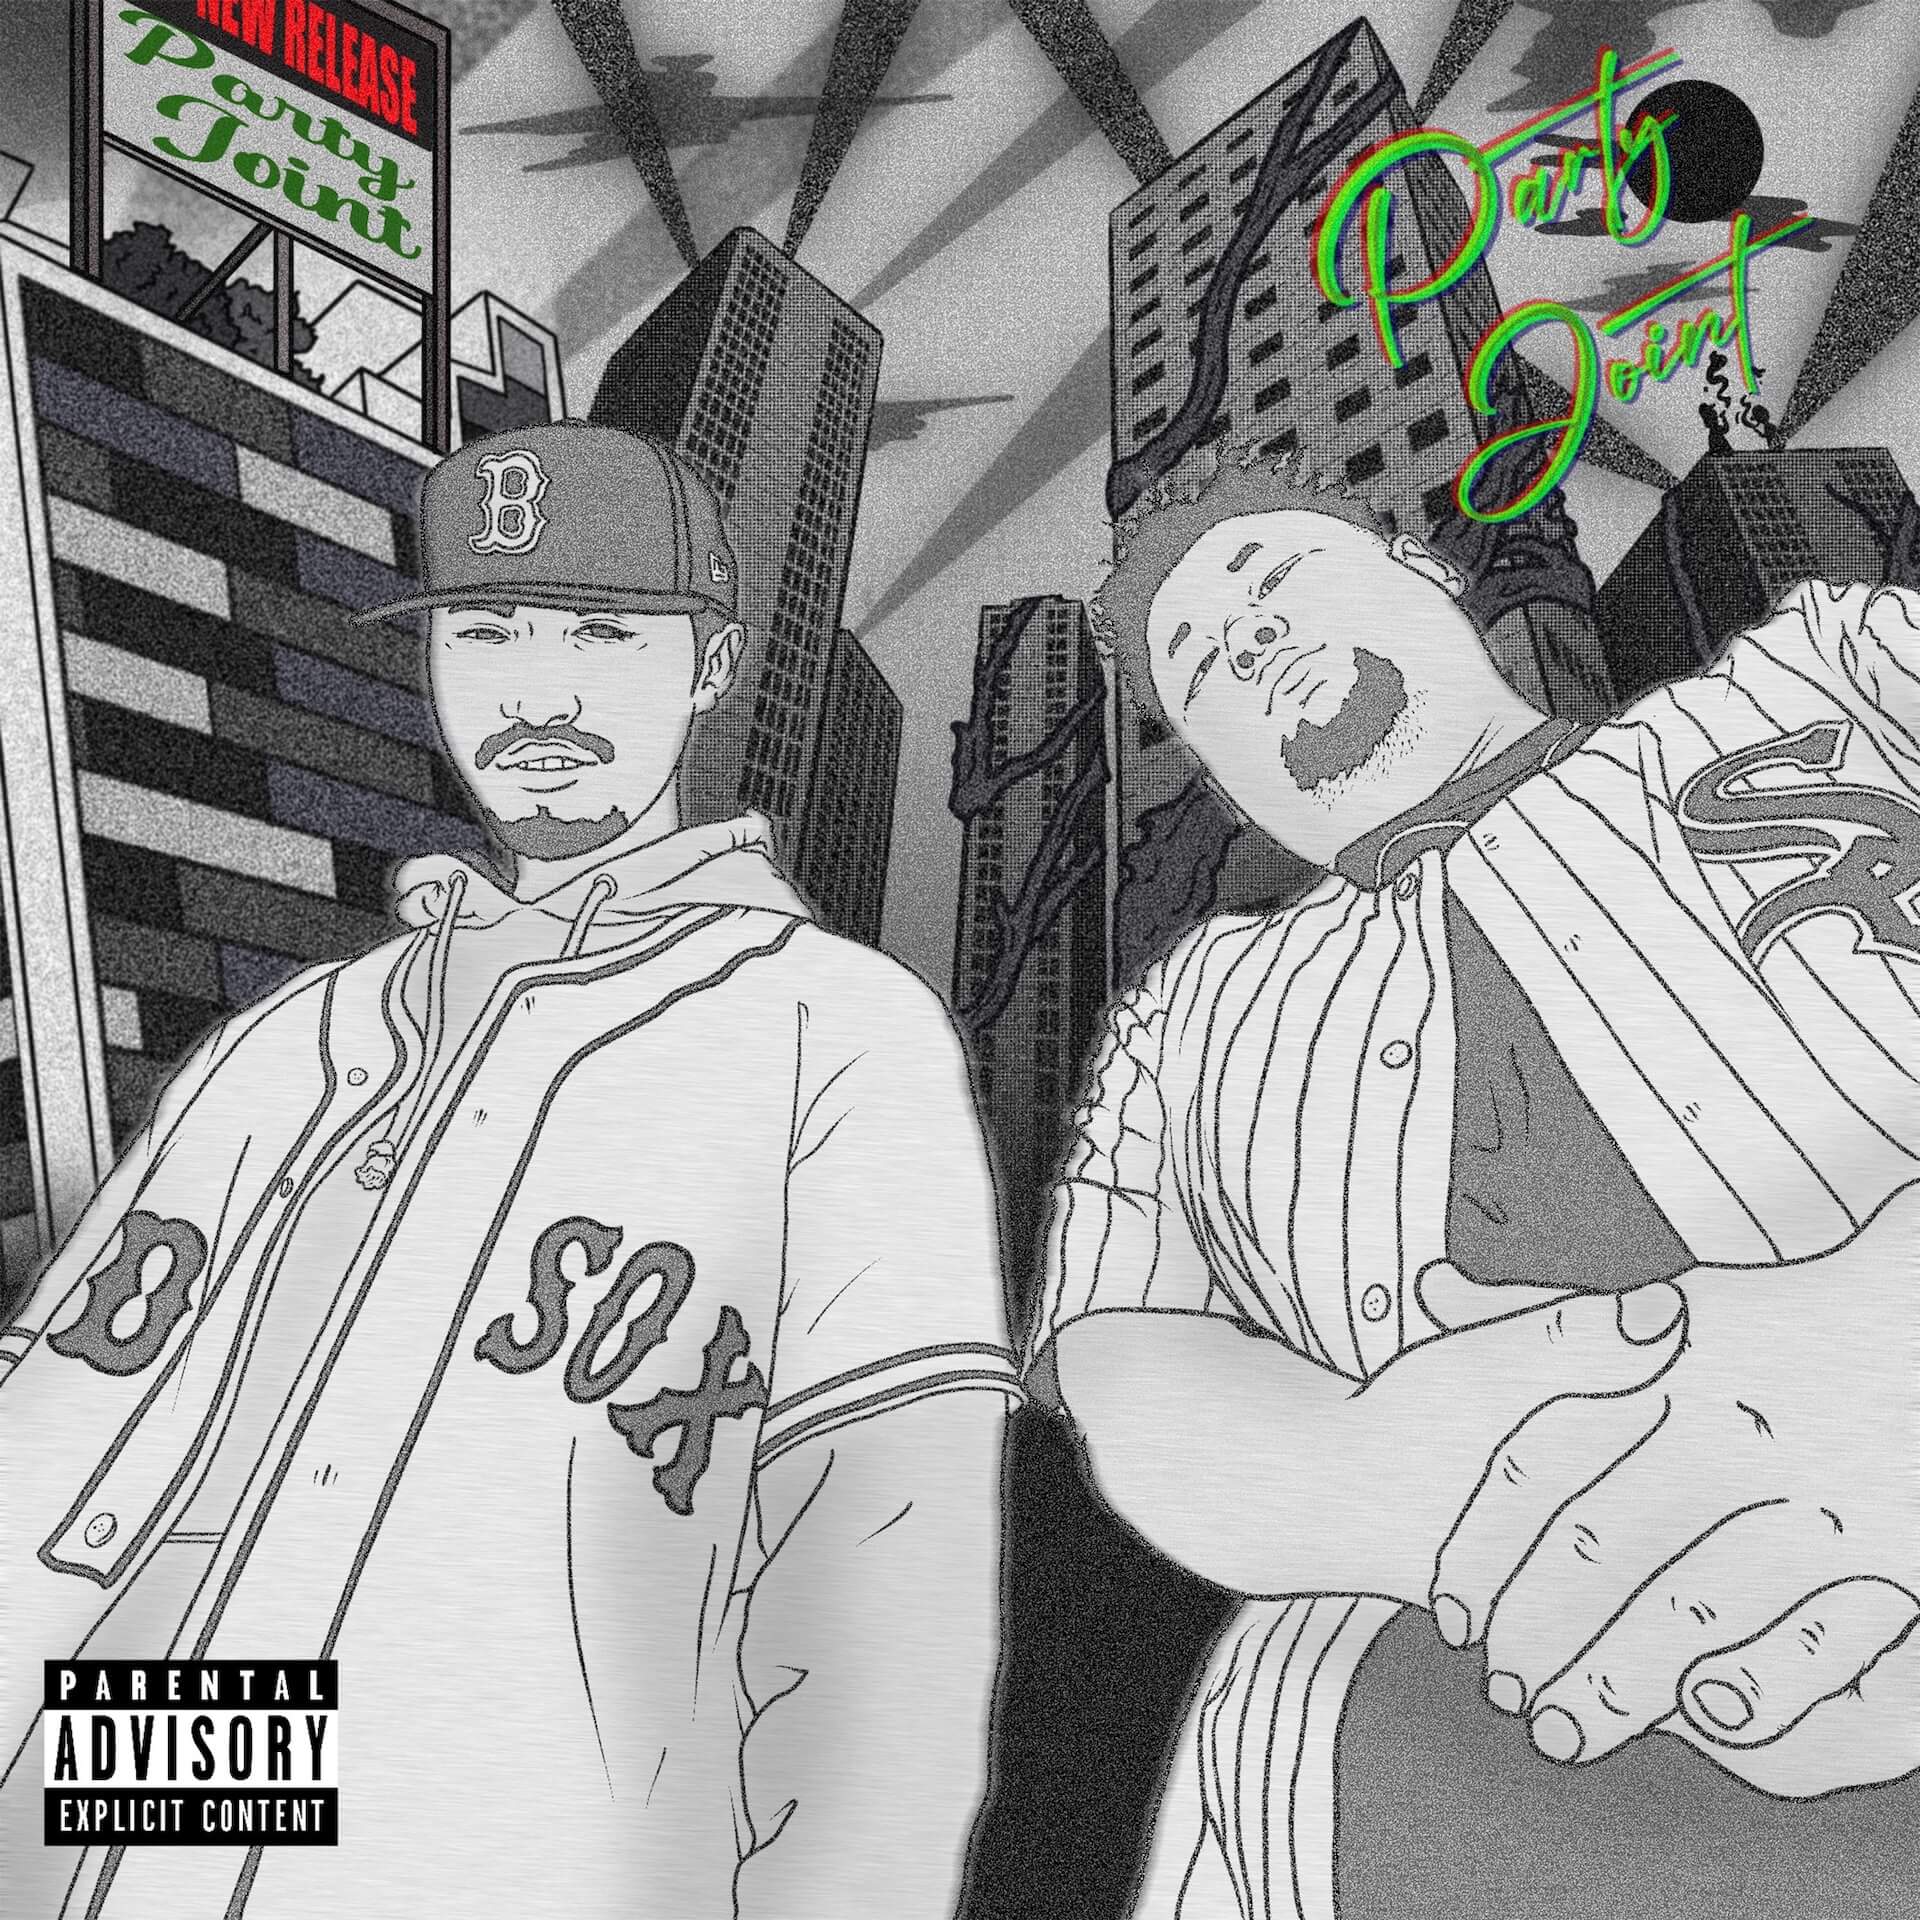 BIG FAFとWeird the artによるEP『Party Joint EP』が配信スタート｜BALLHEAD、Sart、MET as MTHA2、GREEN ASSASSIN DOLLAR、Q.S.Iらが参加 music220927-partyjoint2